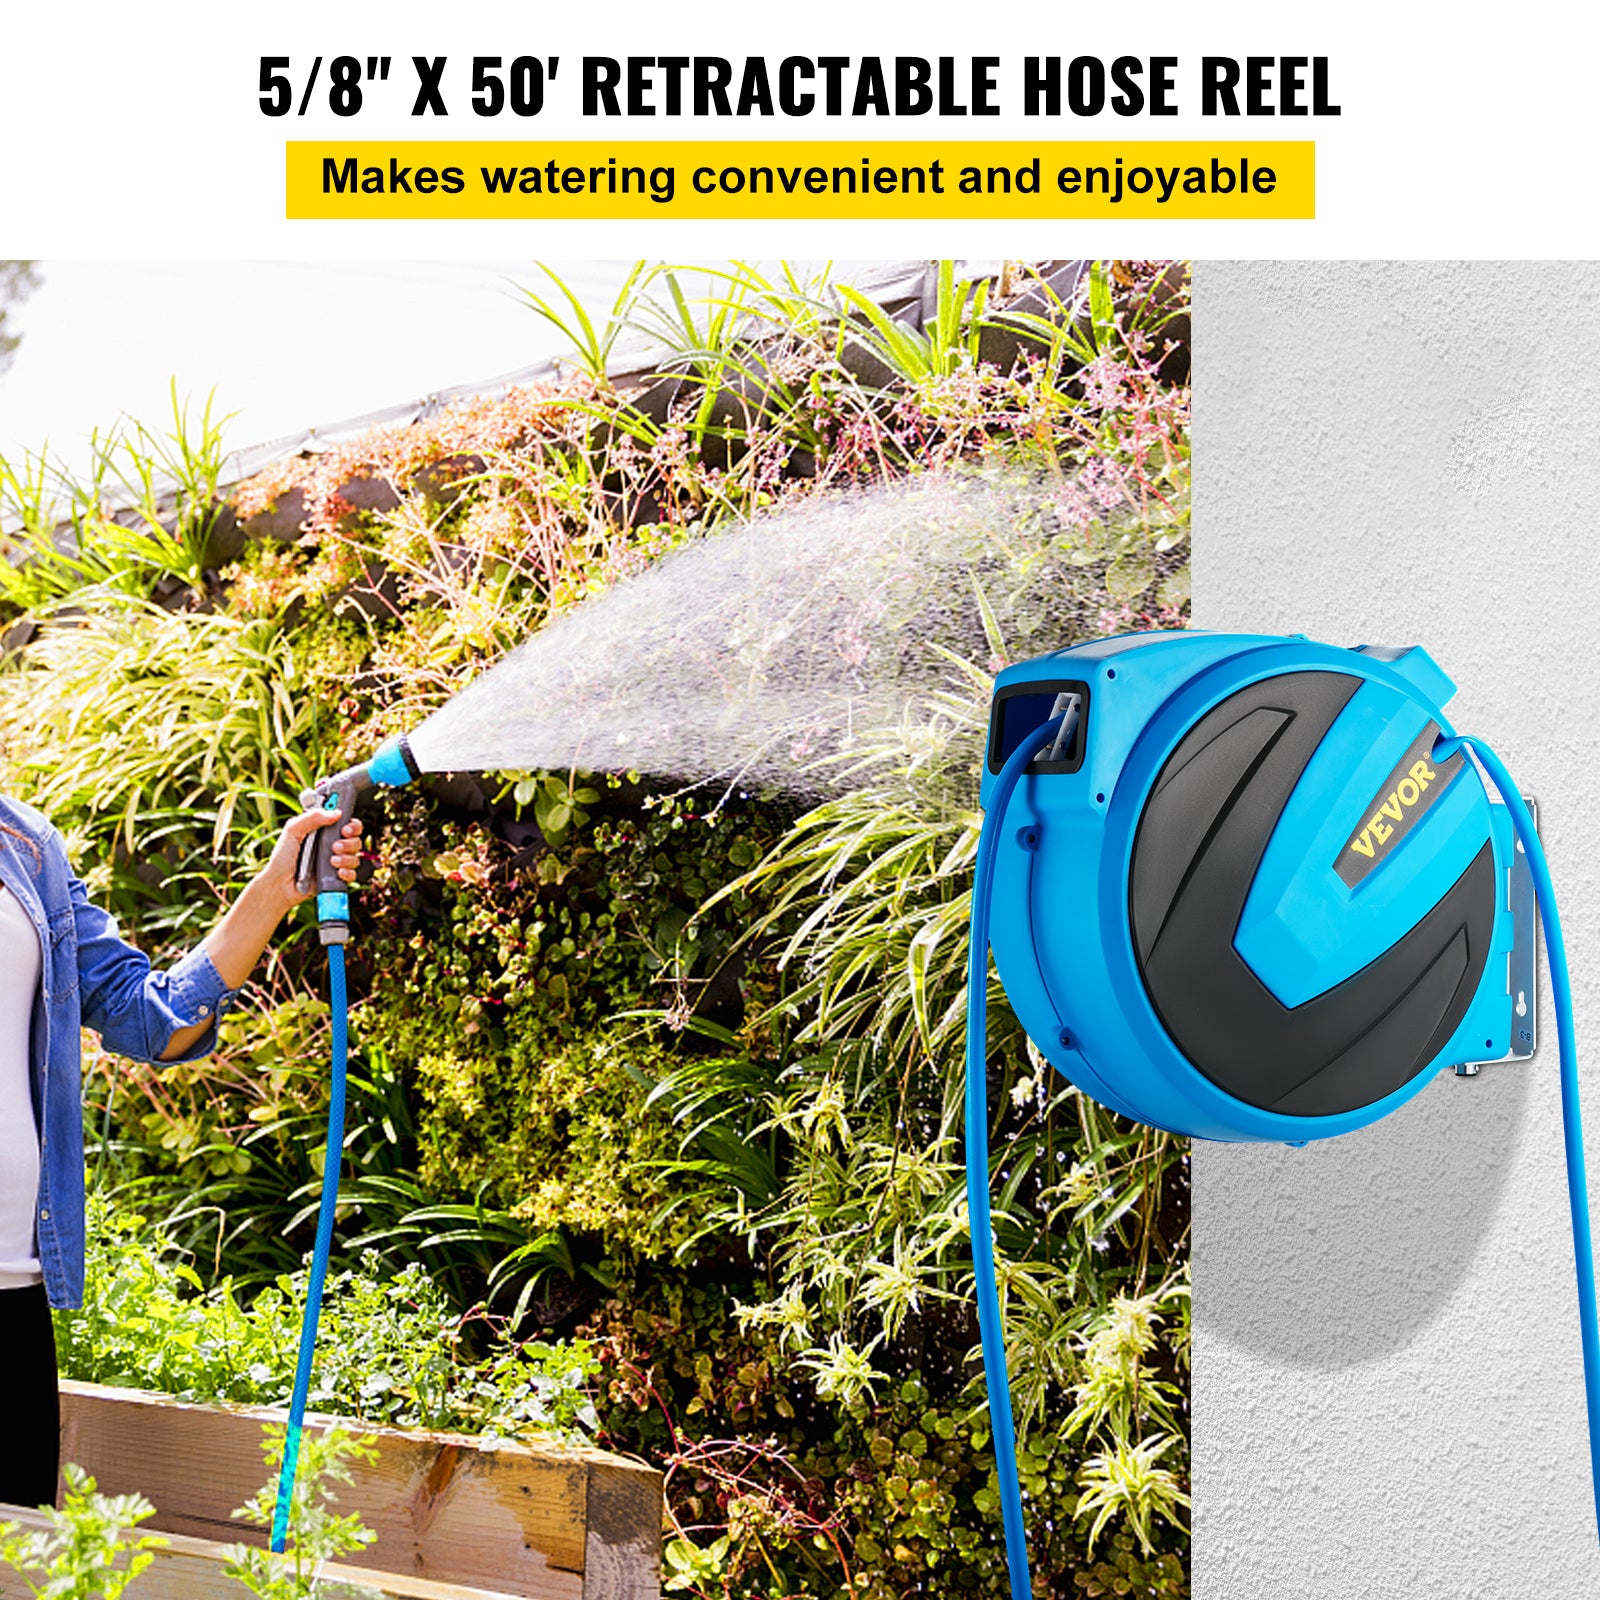 VEVOR Retractable Hose Reel， 5/8 inch x 50 ft， Any Length Lock and Automatic Rewind Water Hose， Wall Mounted Garden Hose Reel With 180° Swivel Bracket and 7 Pattern Hose Nozzle， Blue